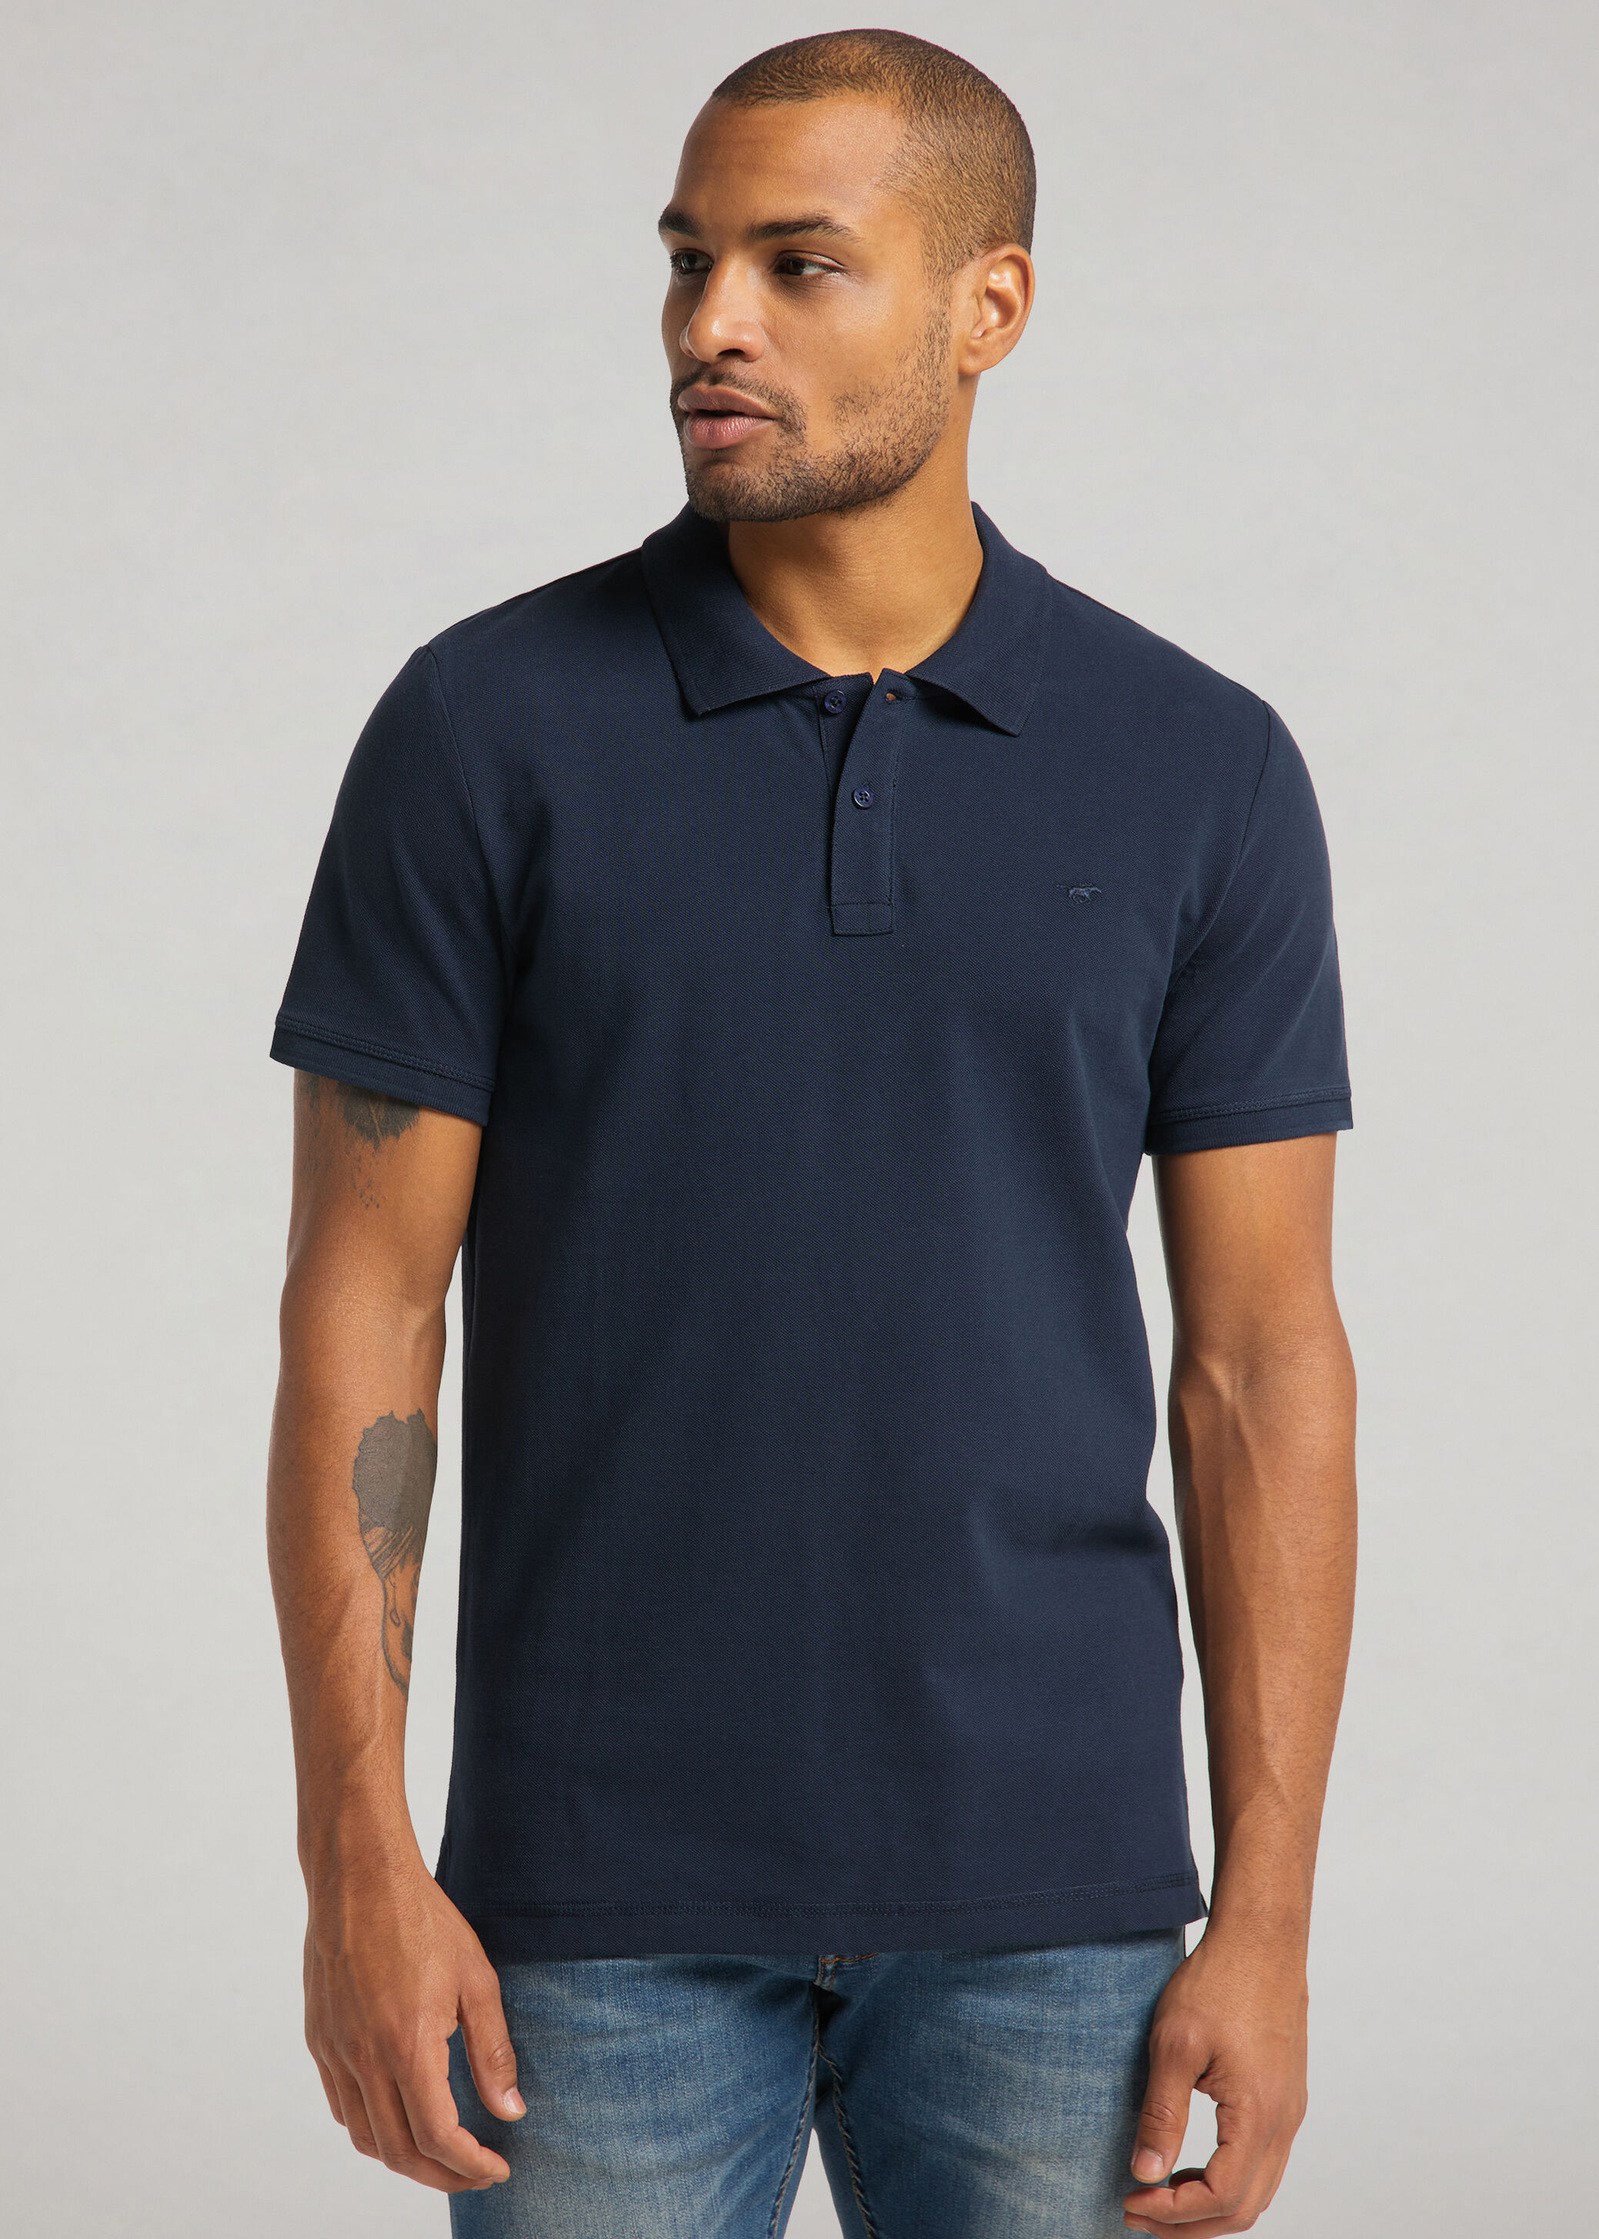 Mustang Polo Dark Sapphire - 1008810-4136 Size M